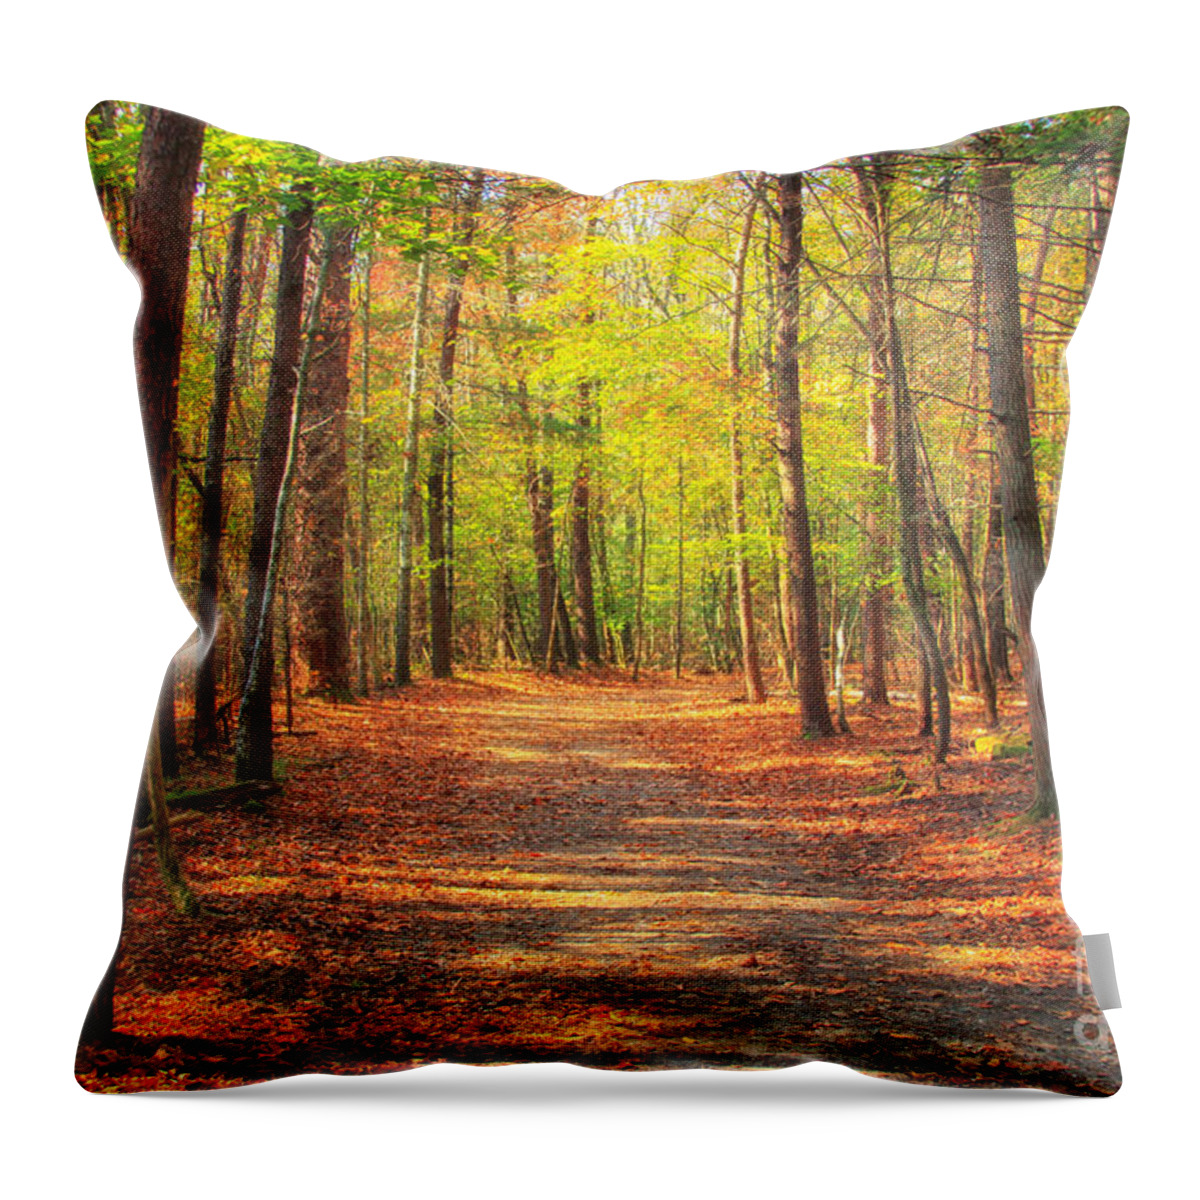 Let's Take A Walk Throw Pillow featuring the photograph Let's Take A Walk #2 by Geraldine DeBoer